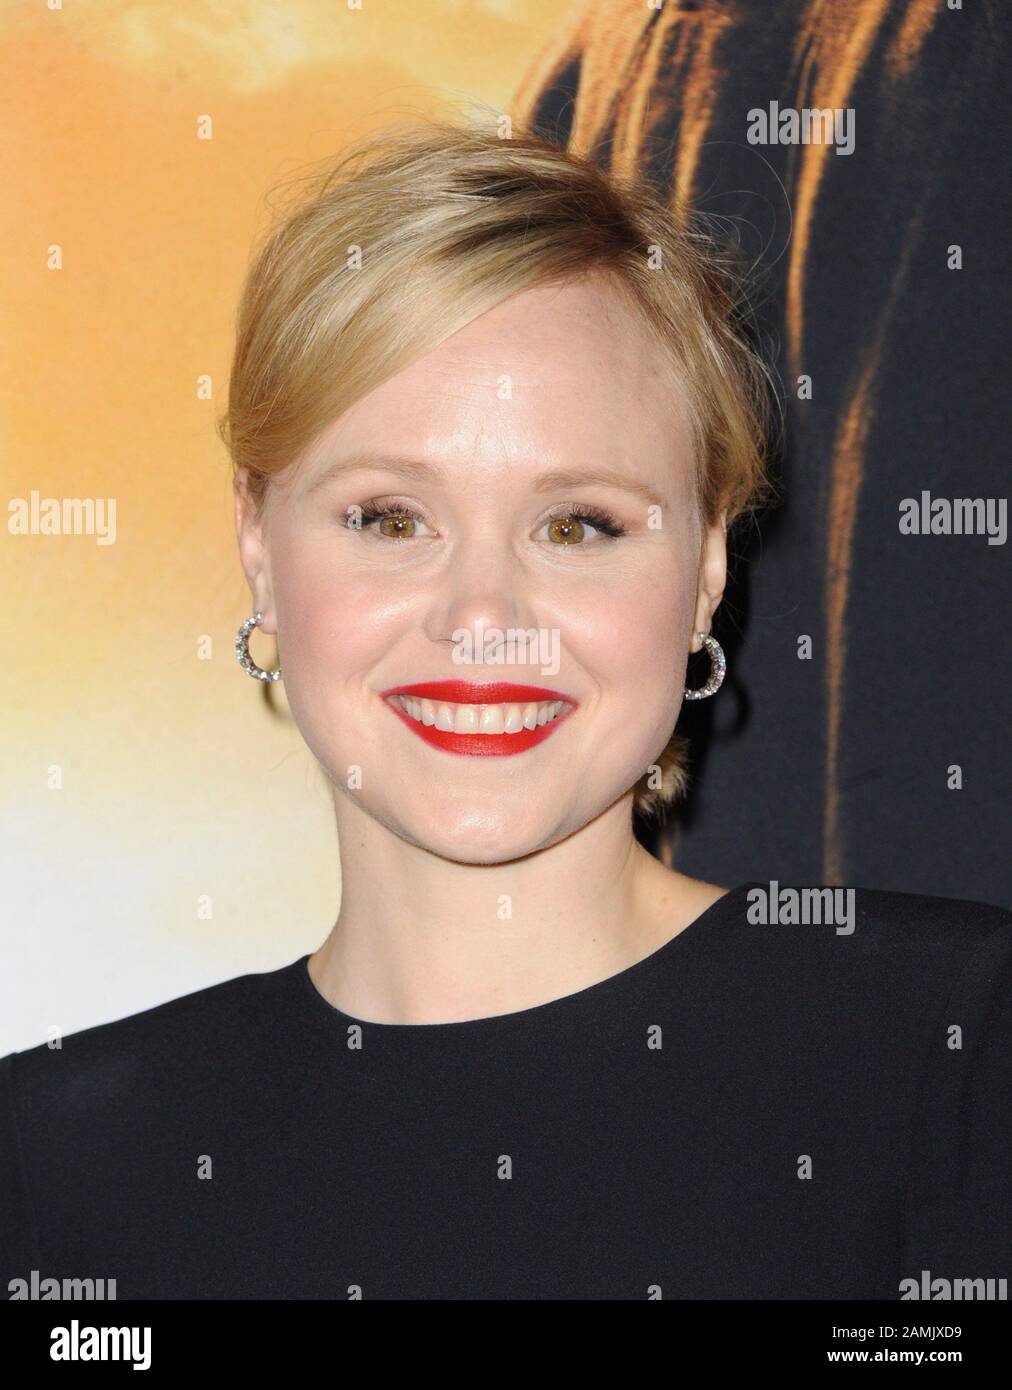 Los Angeles, California. 13th Gen 2020. Alison pill at arrivals for STAR TREK: Picard Series Premiere on CBS All Access, ARCLIGHT Cinemas Cinerama Dome - Hollywood, Los Angeles, CA 13 gennaio 2020. Credit: Elizabeth Goodenough/Everett Collection/Alamy Live News Foto Stock